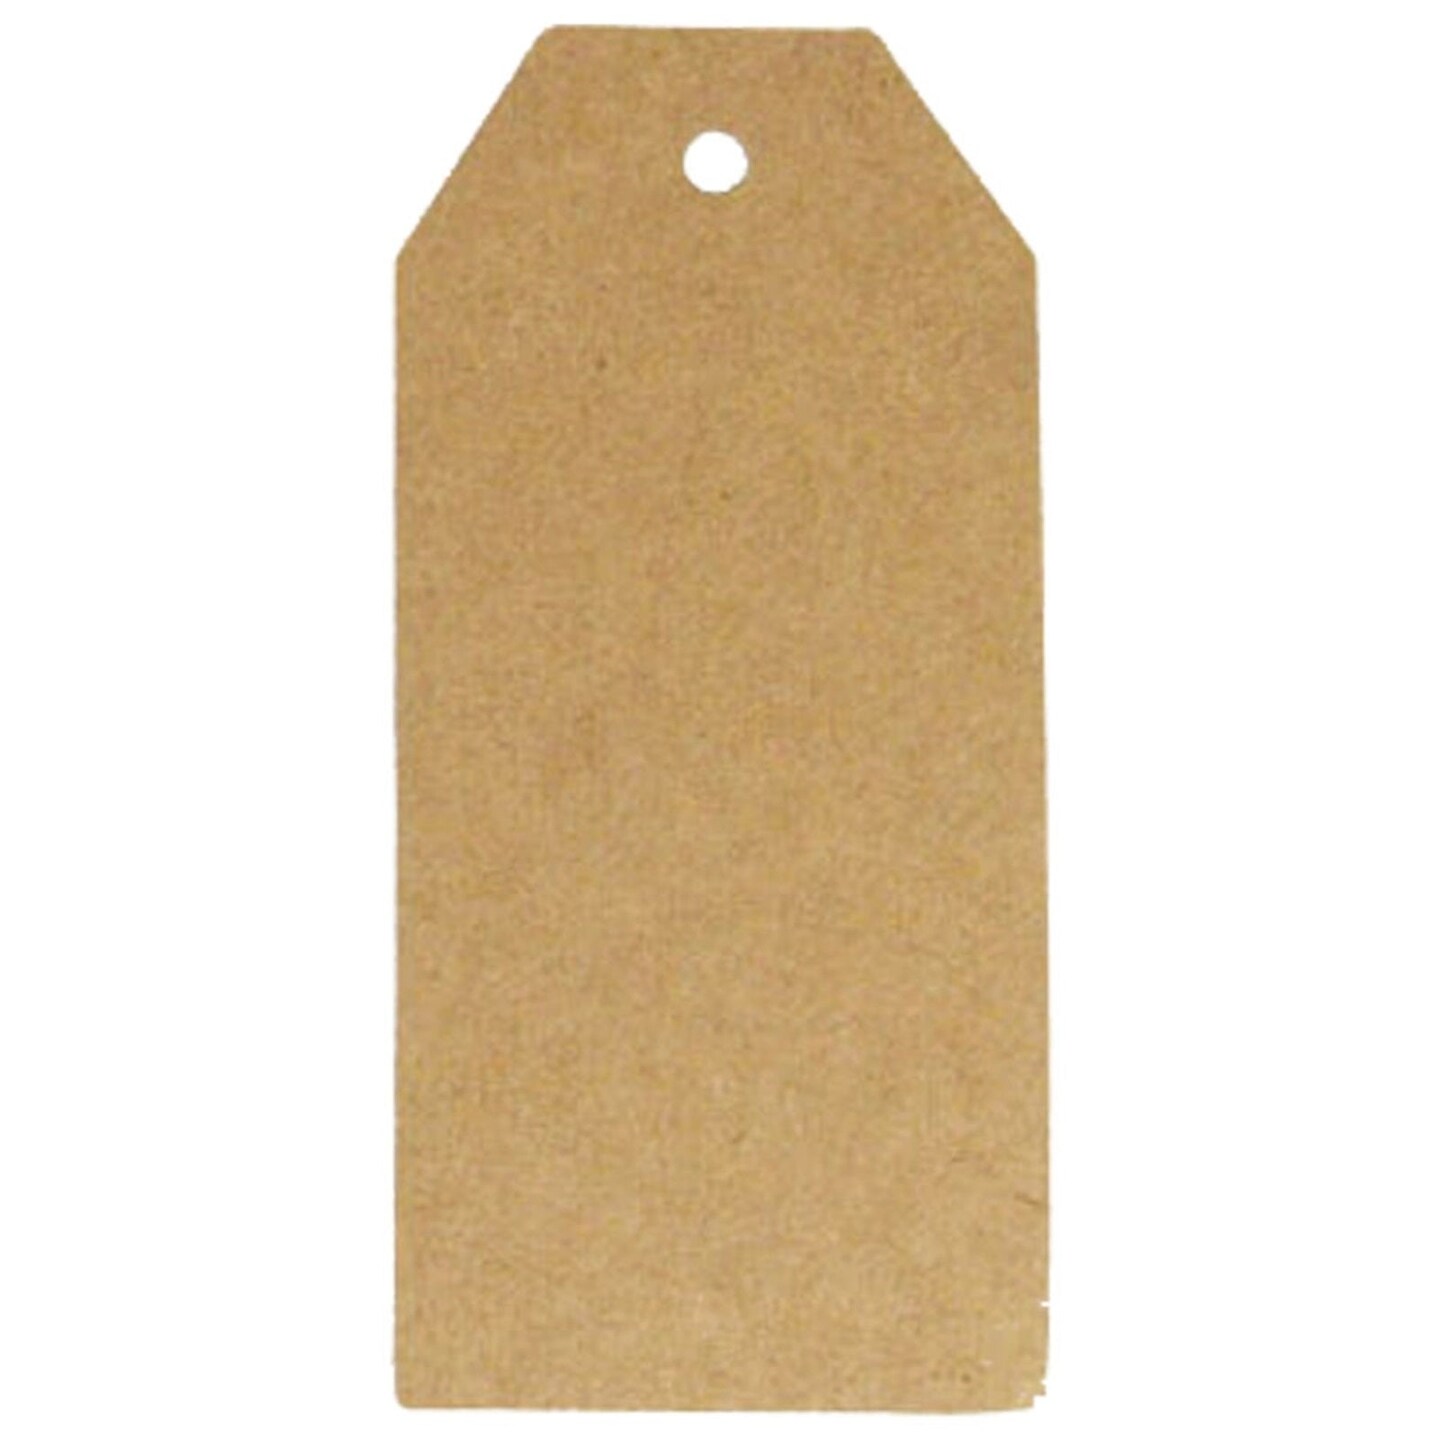 Wrapables Christmas Holiday Gift Tags/Kraft Paper Hang Tags for Gift-W